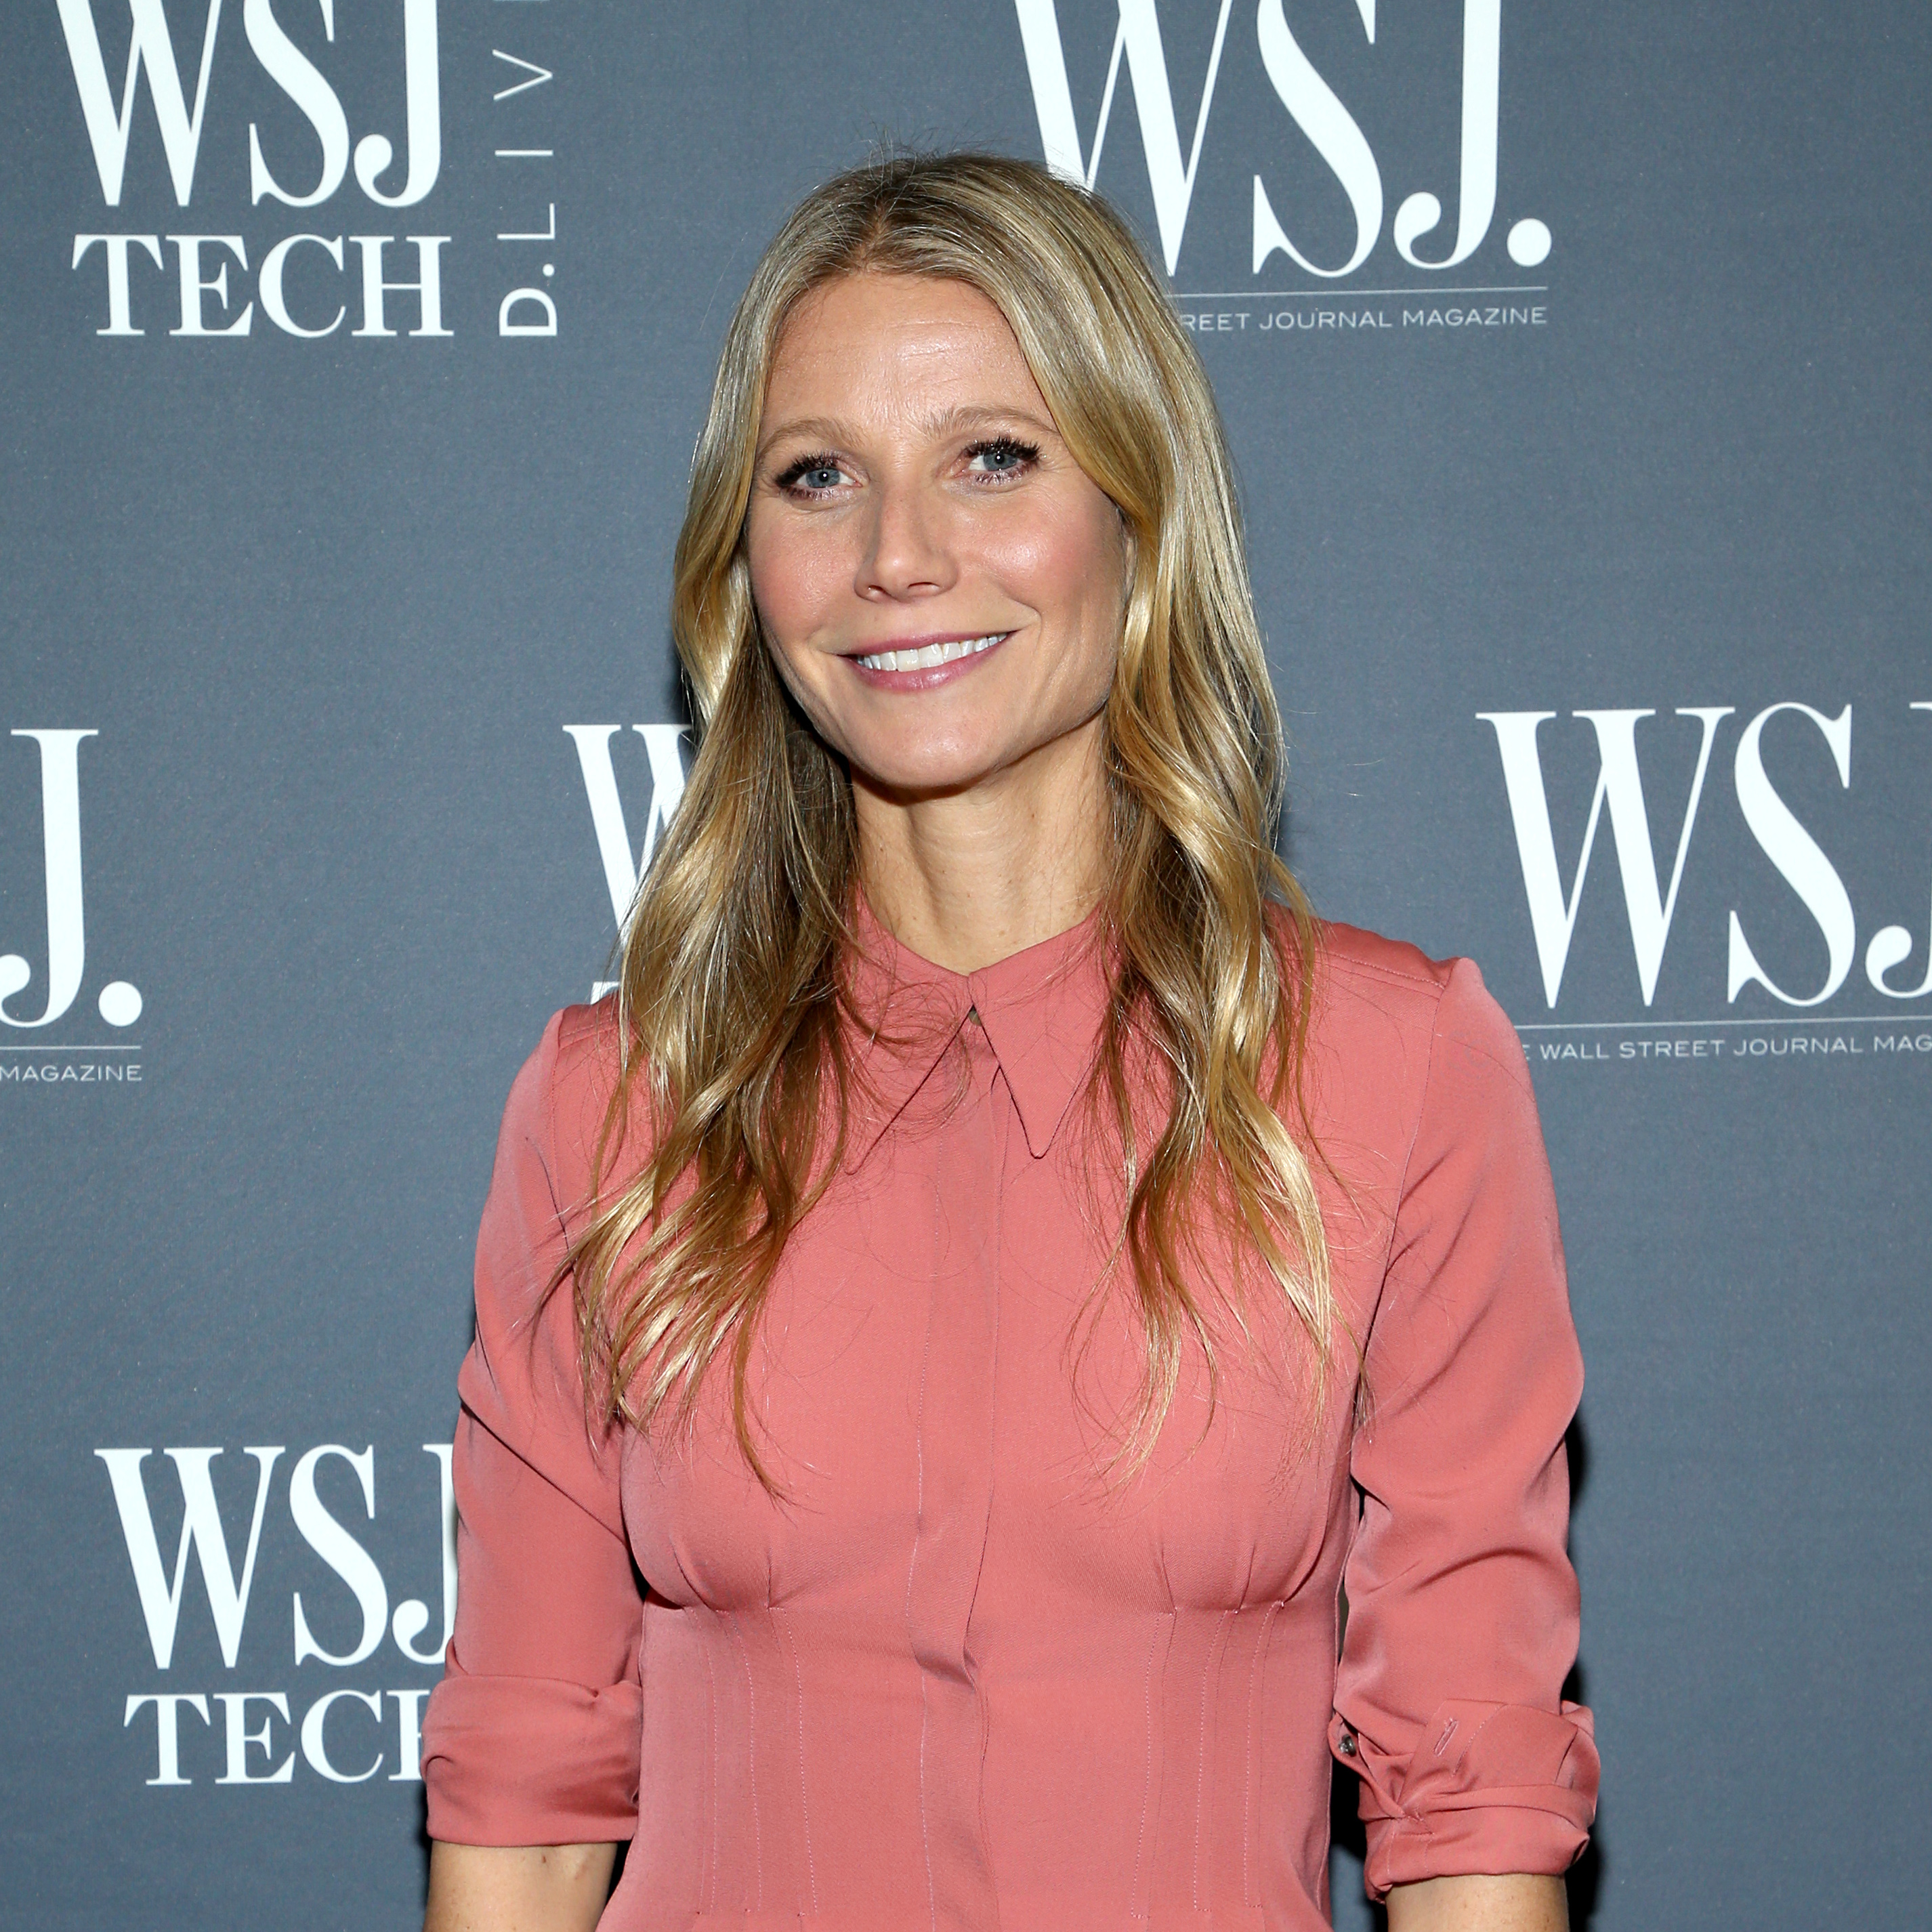 Gwyneth Paltrow in a pink blouse poses at the WSJ Tech event